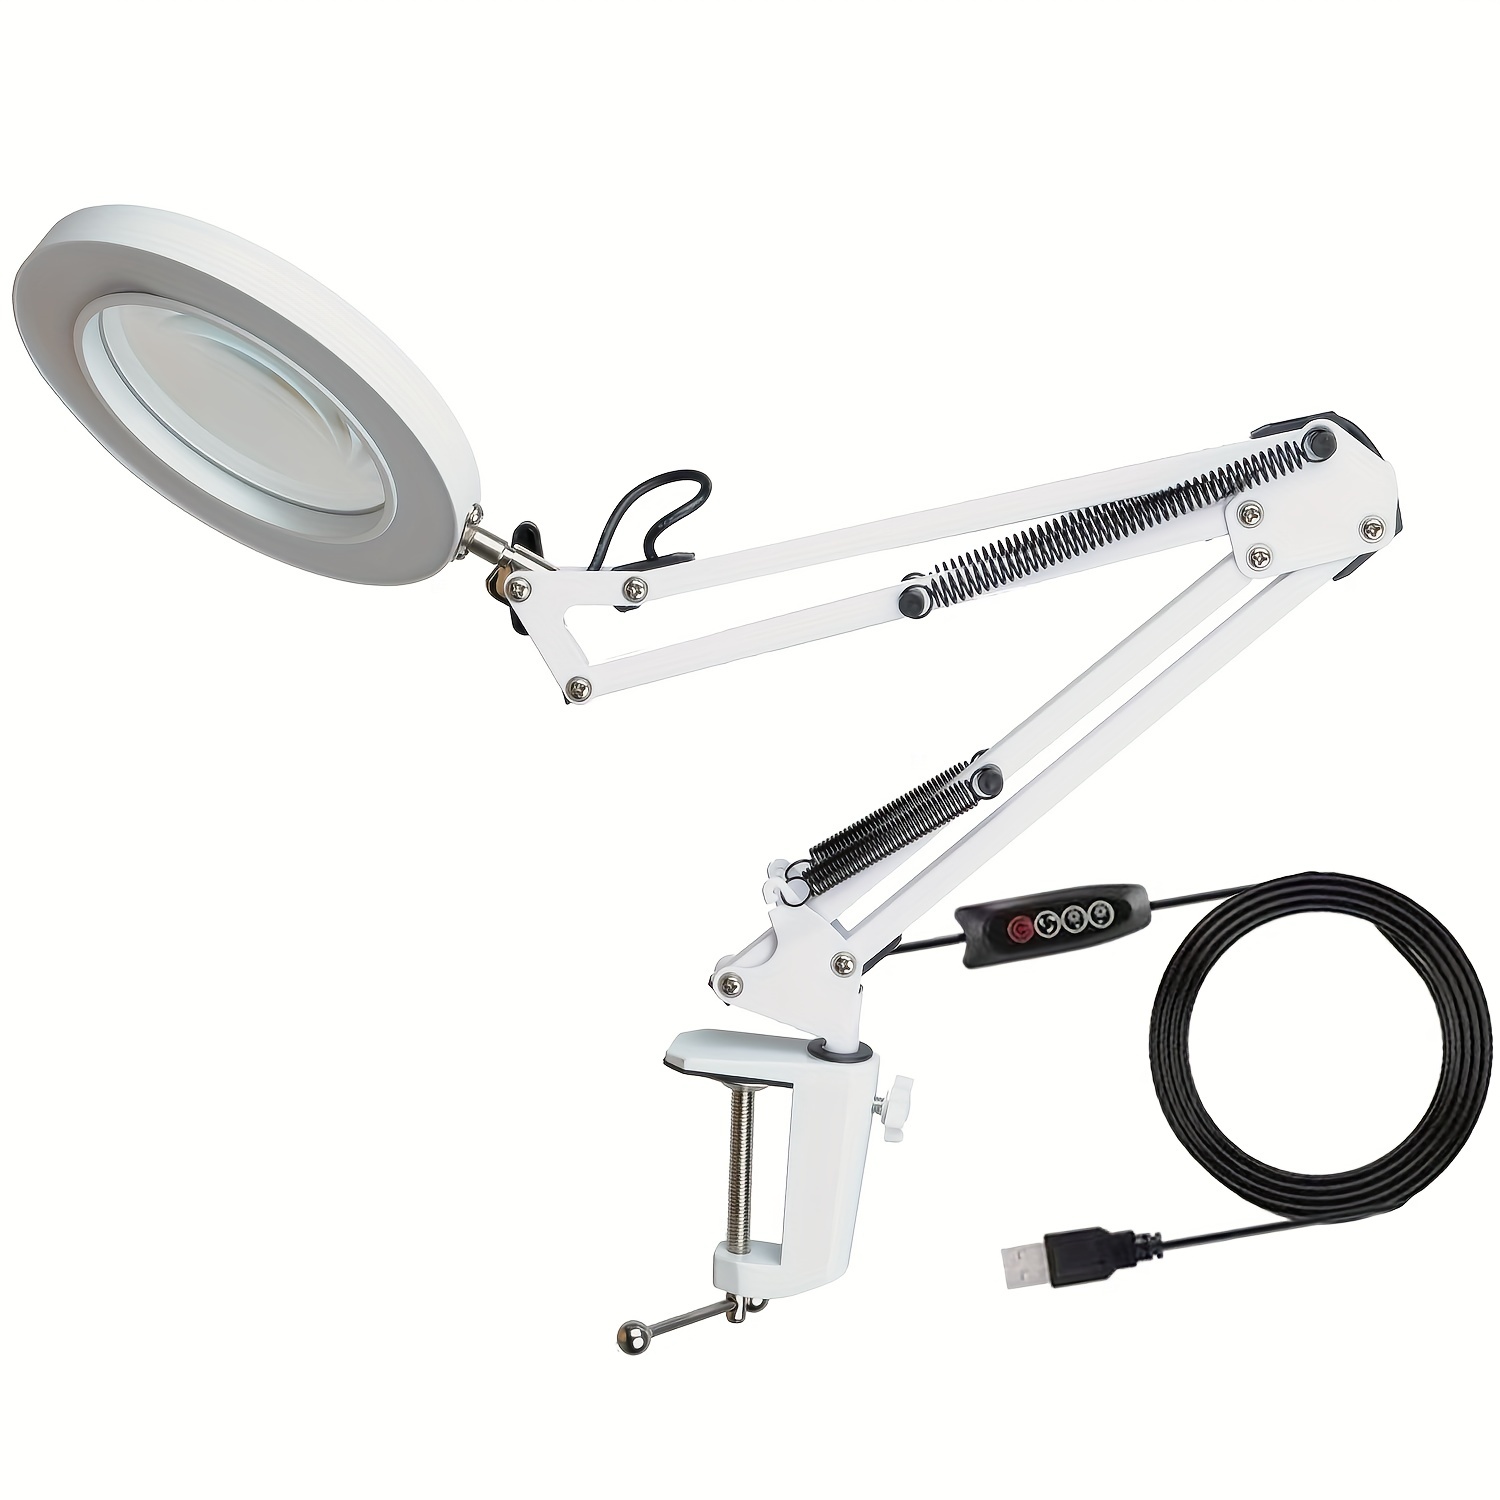 10X Magnifying Glass Desk Light Magnifier LED Lamp Reading Lamp With  Base&Clamp